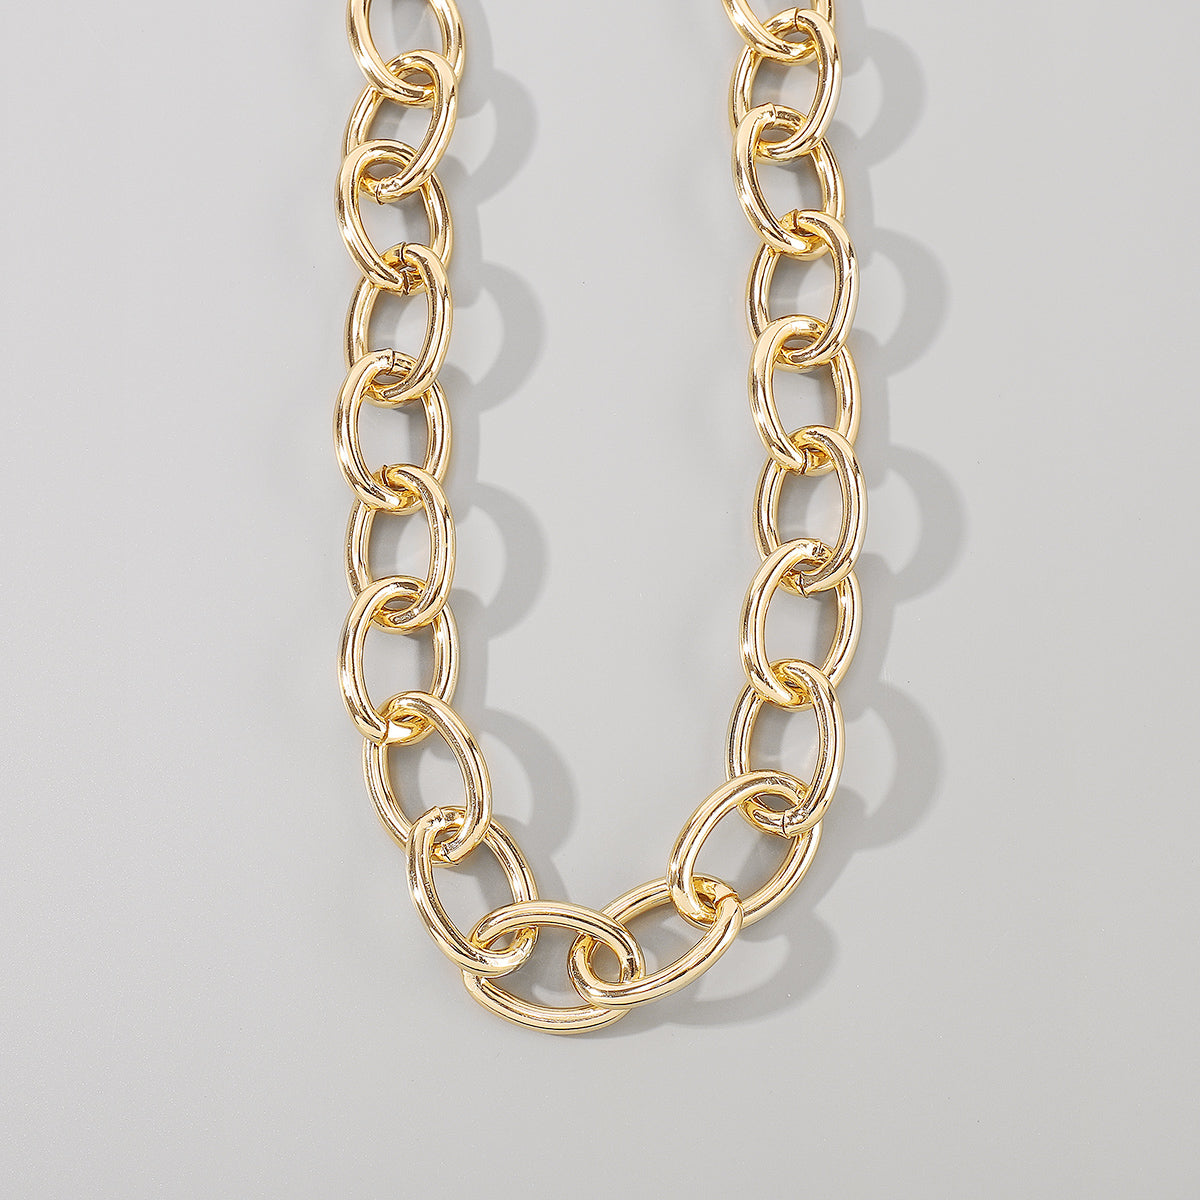 N7145 Punk Chain Link Necklace